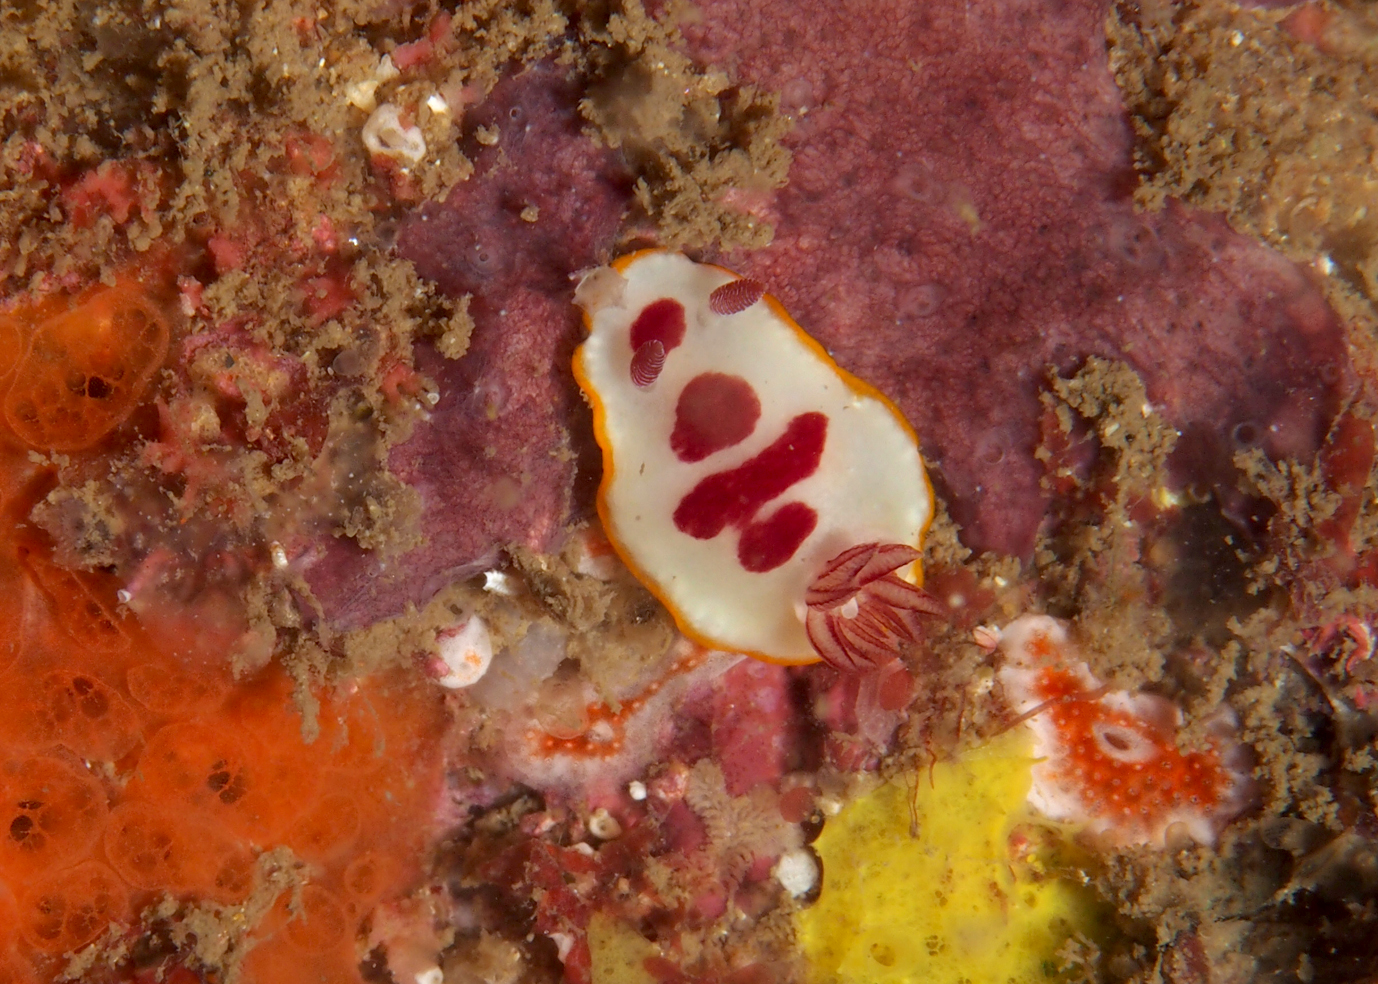 Goniobranchus_Splendidus. The red and white part of the pattern varies significantly, but fish have learned to look for the yellow circle - which is consistent. Photo: Cedric van den Berg